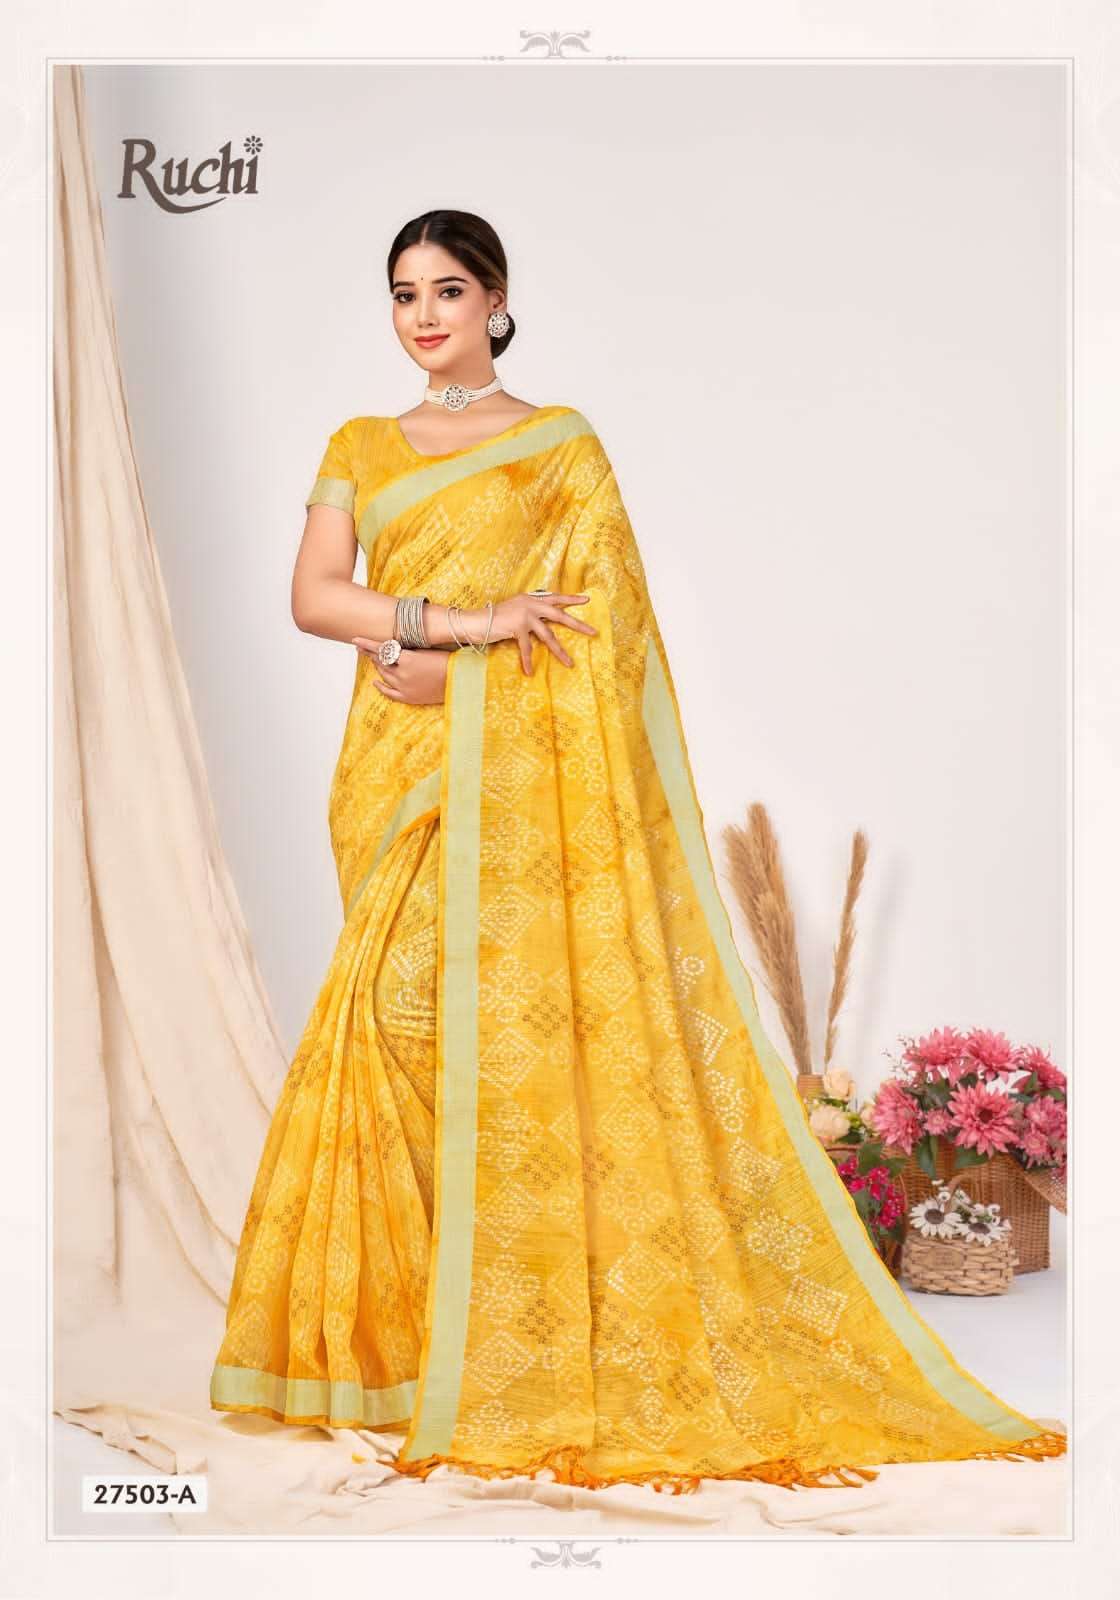 Ruchi Sarees Aarushi Cotton Silk with Border Attech Fancy sa...